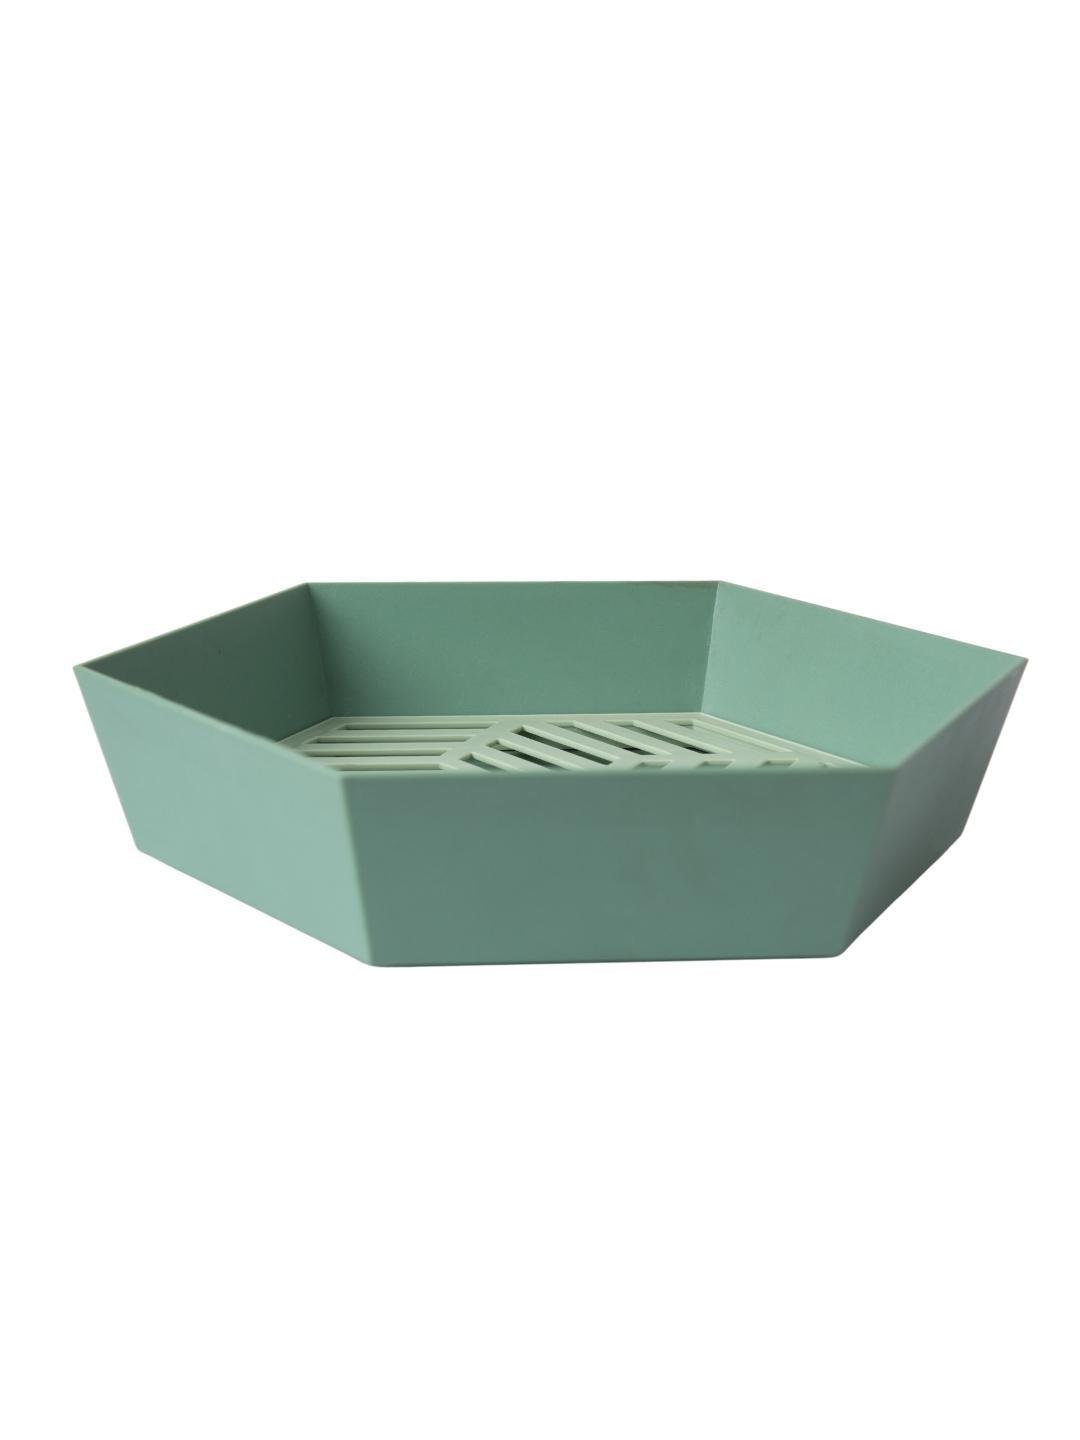 Decorative Geometry Fruit Basket with Removable Drainage Layer - Green